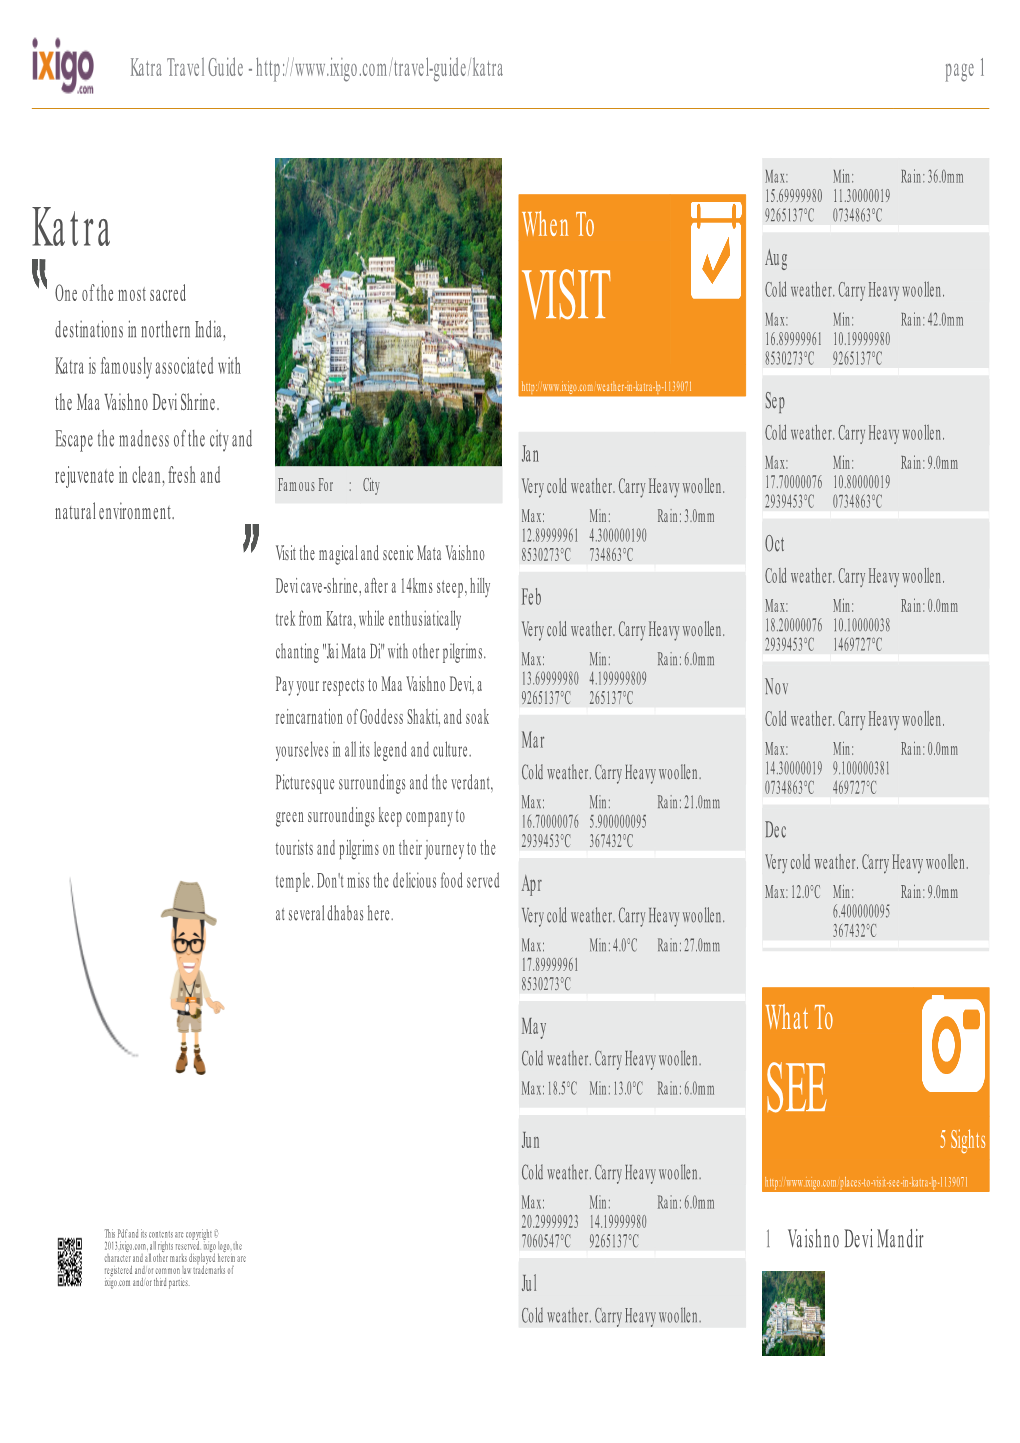 Katra Travel Guide - Page 1